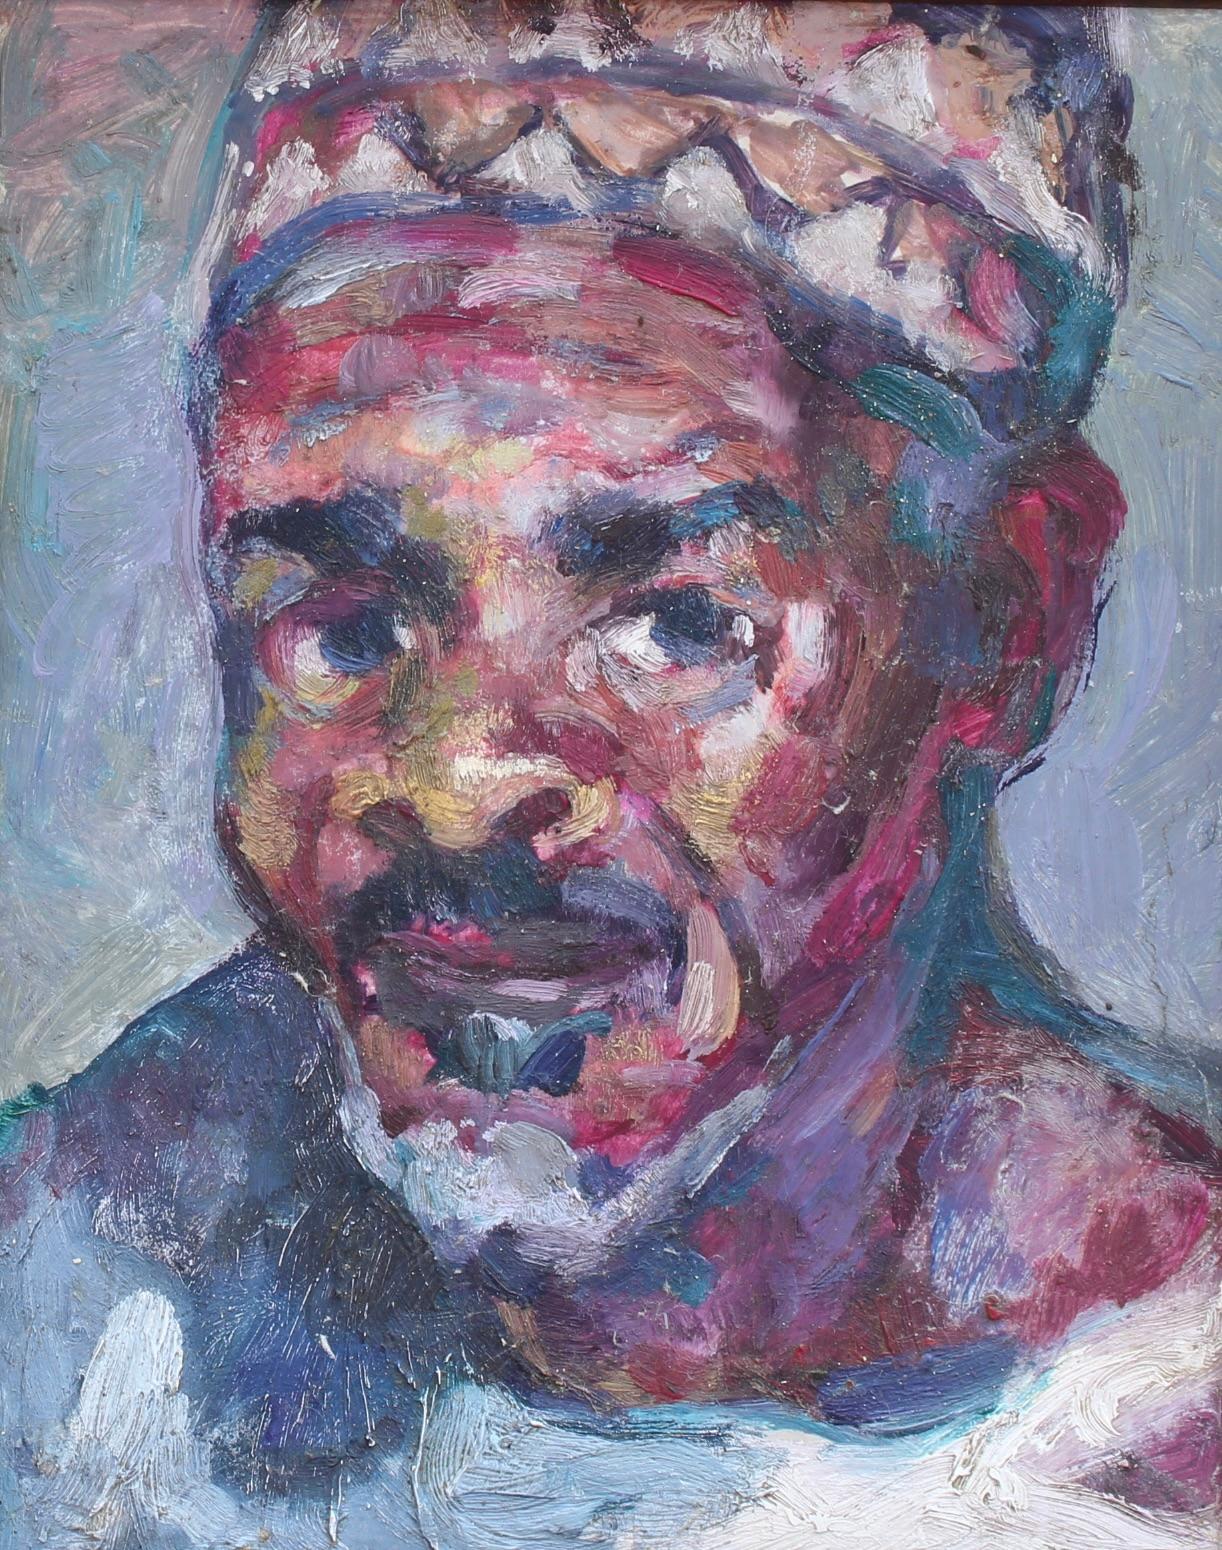 'Portrait of Man in Cap', oil on canvas, French School (circa 1960s-70s). This artwork was discovered in the South of France. A splendid portrait it is and is most likely from one of the countries in French-speaking Africa. Most of those countries